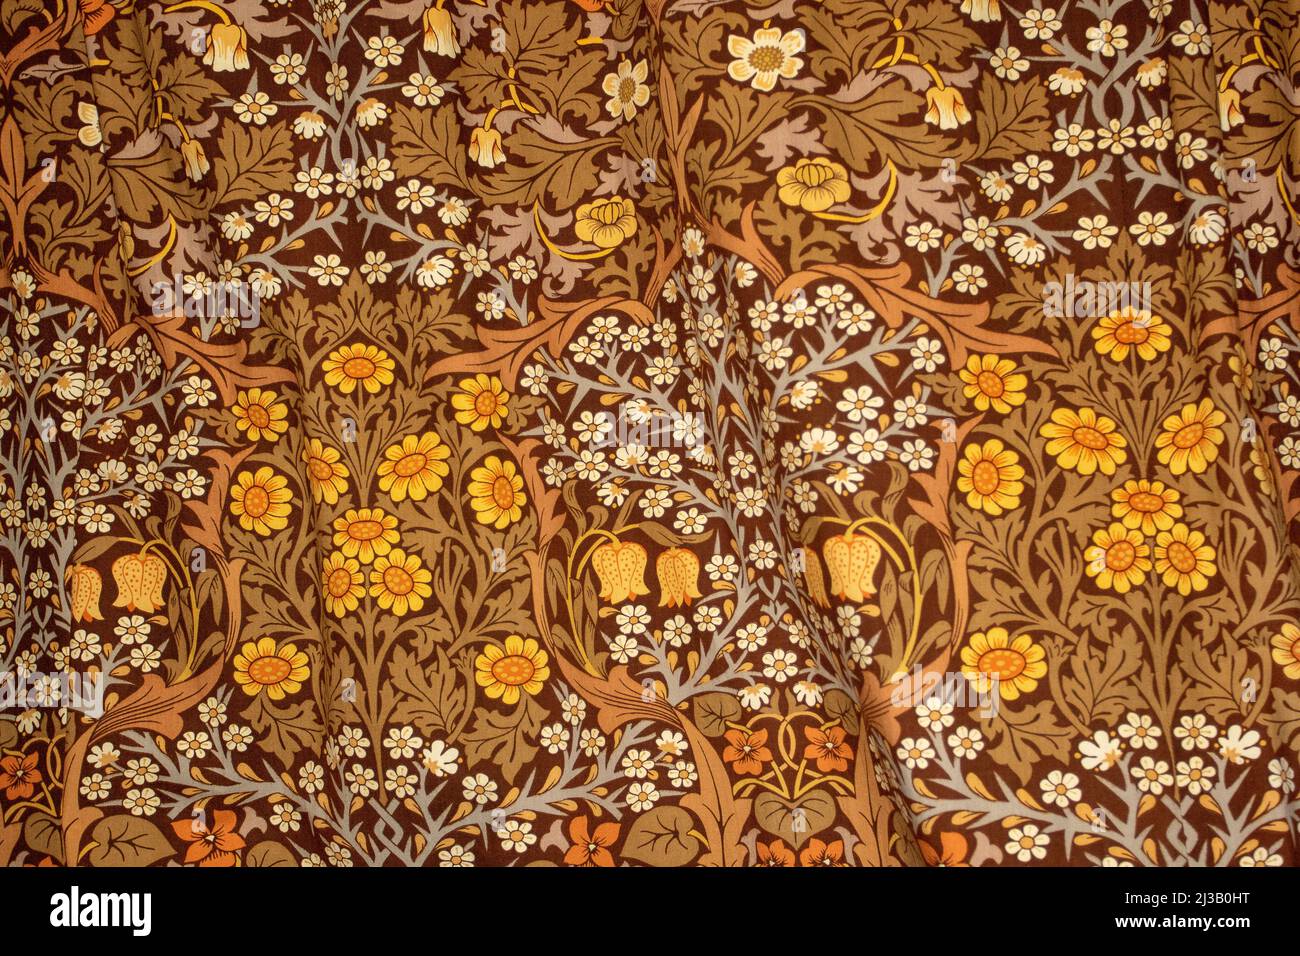 Charming Victorian style floral fabric design in muted brown and yellow earth colours Stock Photo